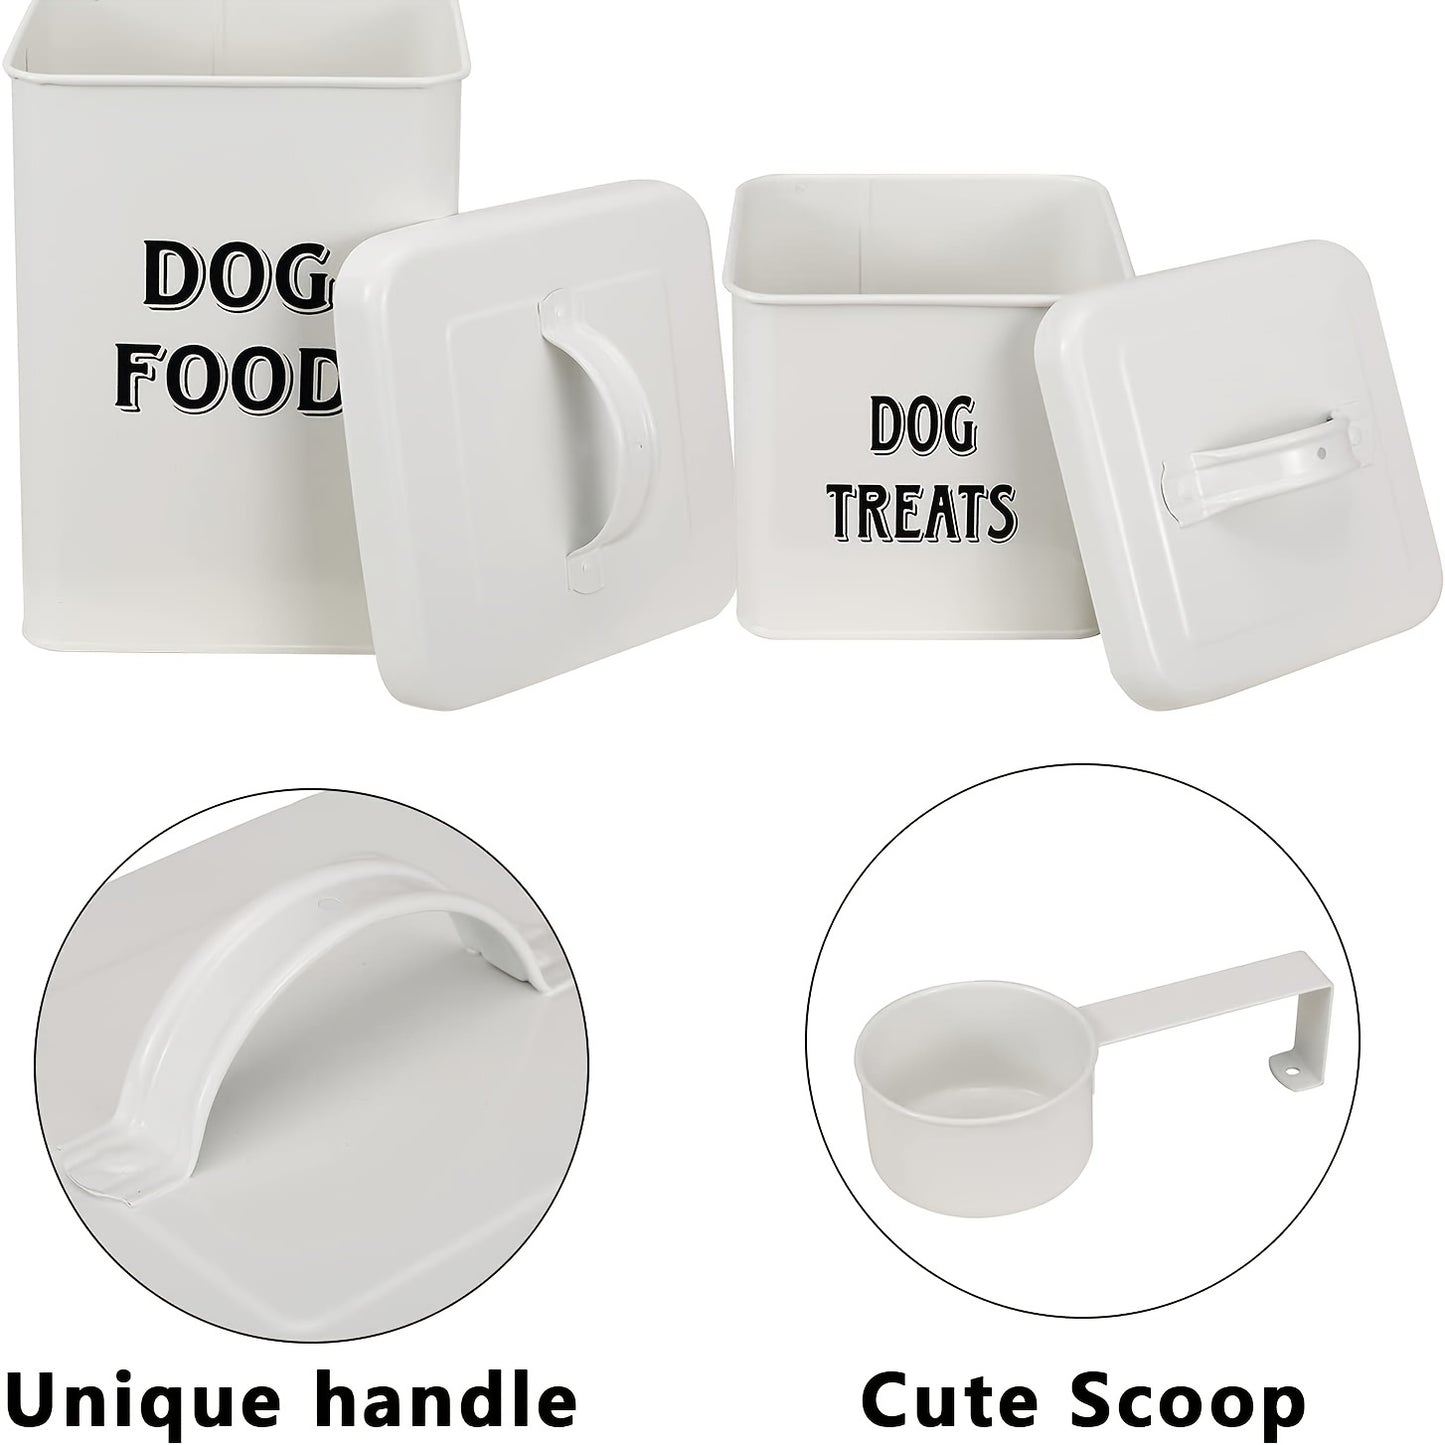 2pcs Metal Pet Food Treat Storage Container Set, Durable Pet Food Storage Bucket With Airtight Lid And Scoop For Household Dry Food Storage